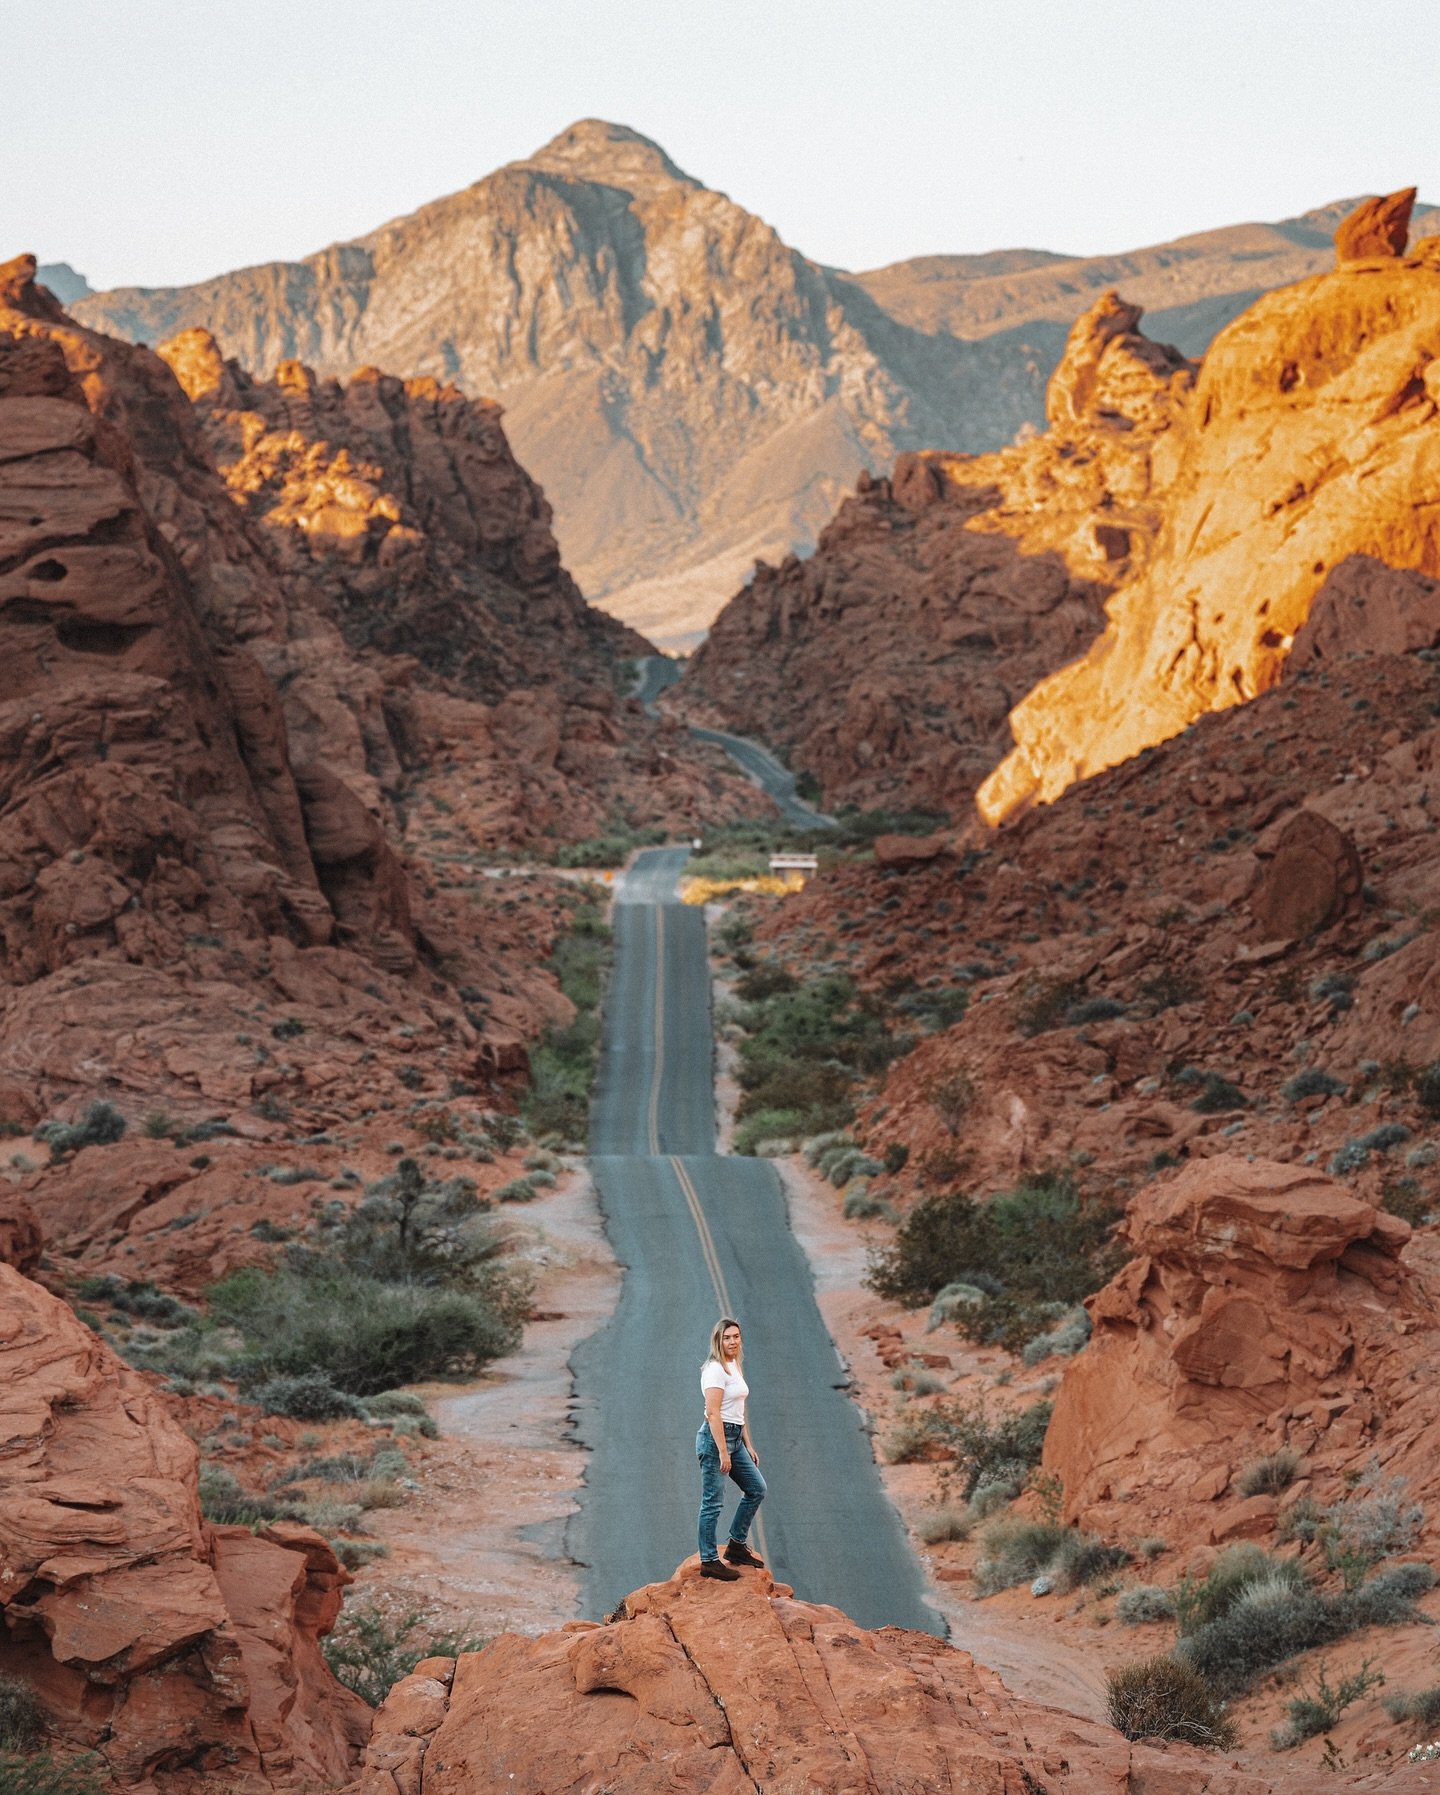 Valley of Fire at sunrise 🌄 one of my favorite places I&rsquo;ve visited so far this year.⁣
⁣
(who needs a gym membership when you can take selfies with a telephoto lens? 🏃🏼&zwj;♀️🫠)⁣
⁣
📸 @sonyalpha a1 + 70-200mm f/2.8 GM II⁣
#sonyambassador #va